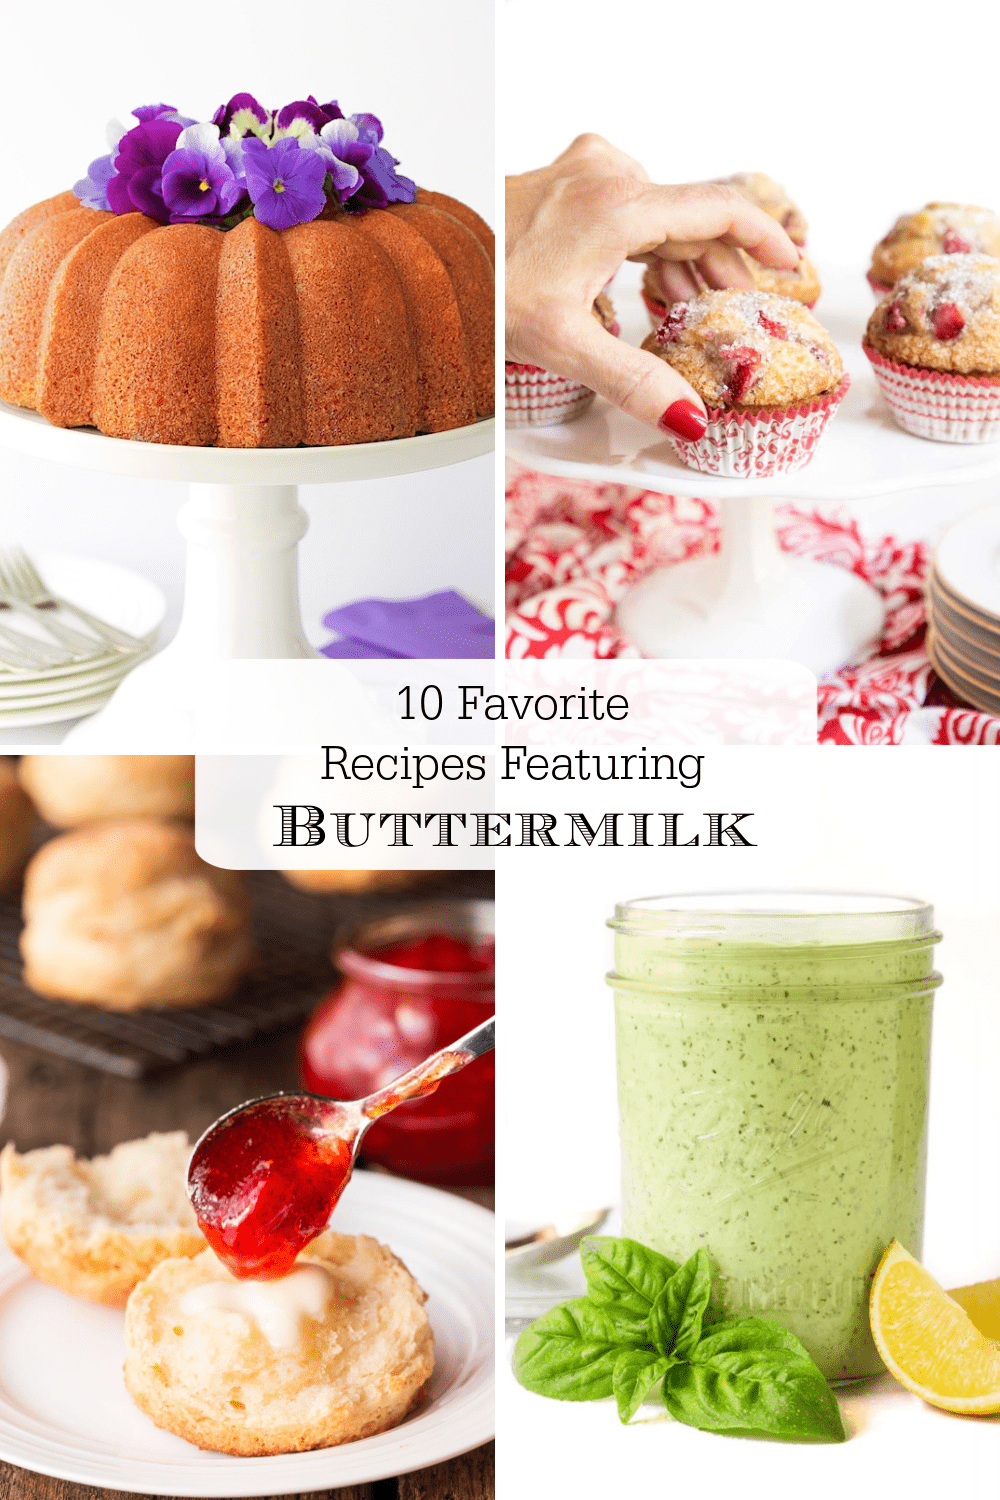 10 delicious Recipes Featuring Buttermilk (a magical ingredient)!